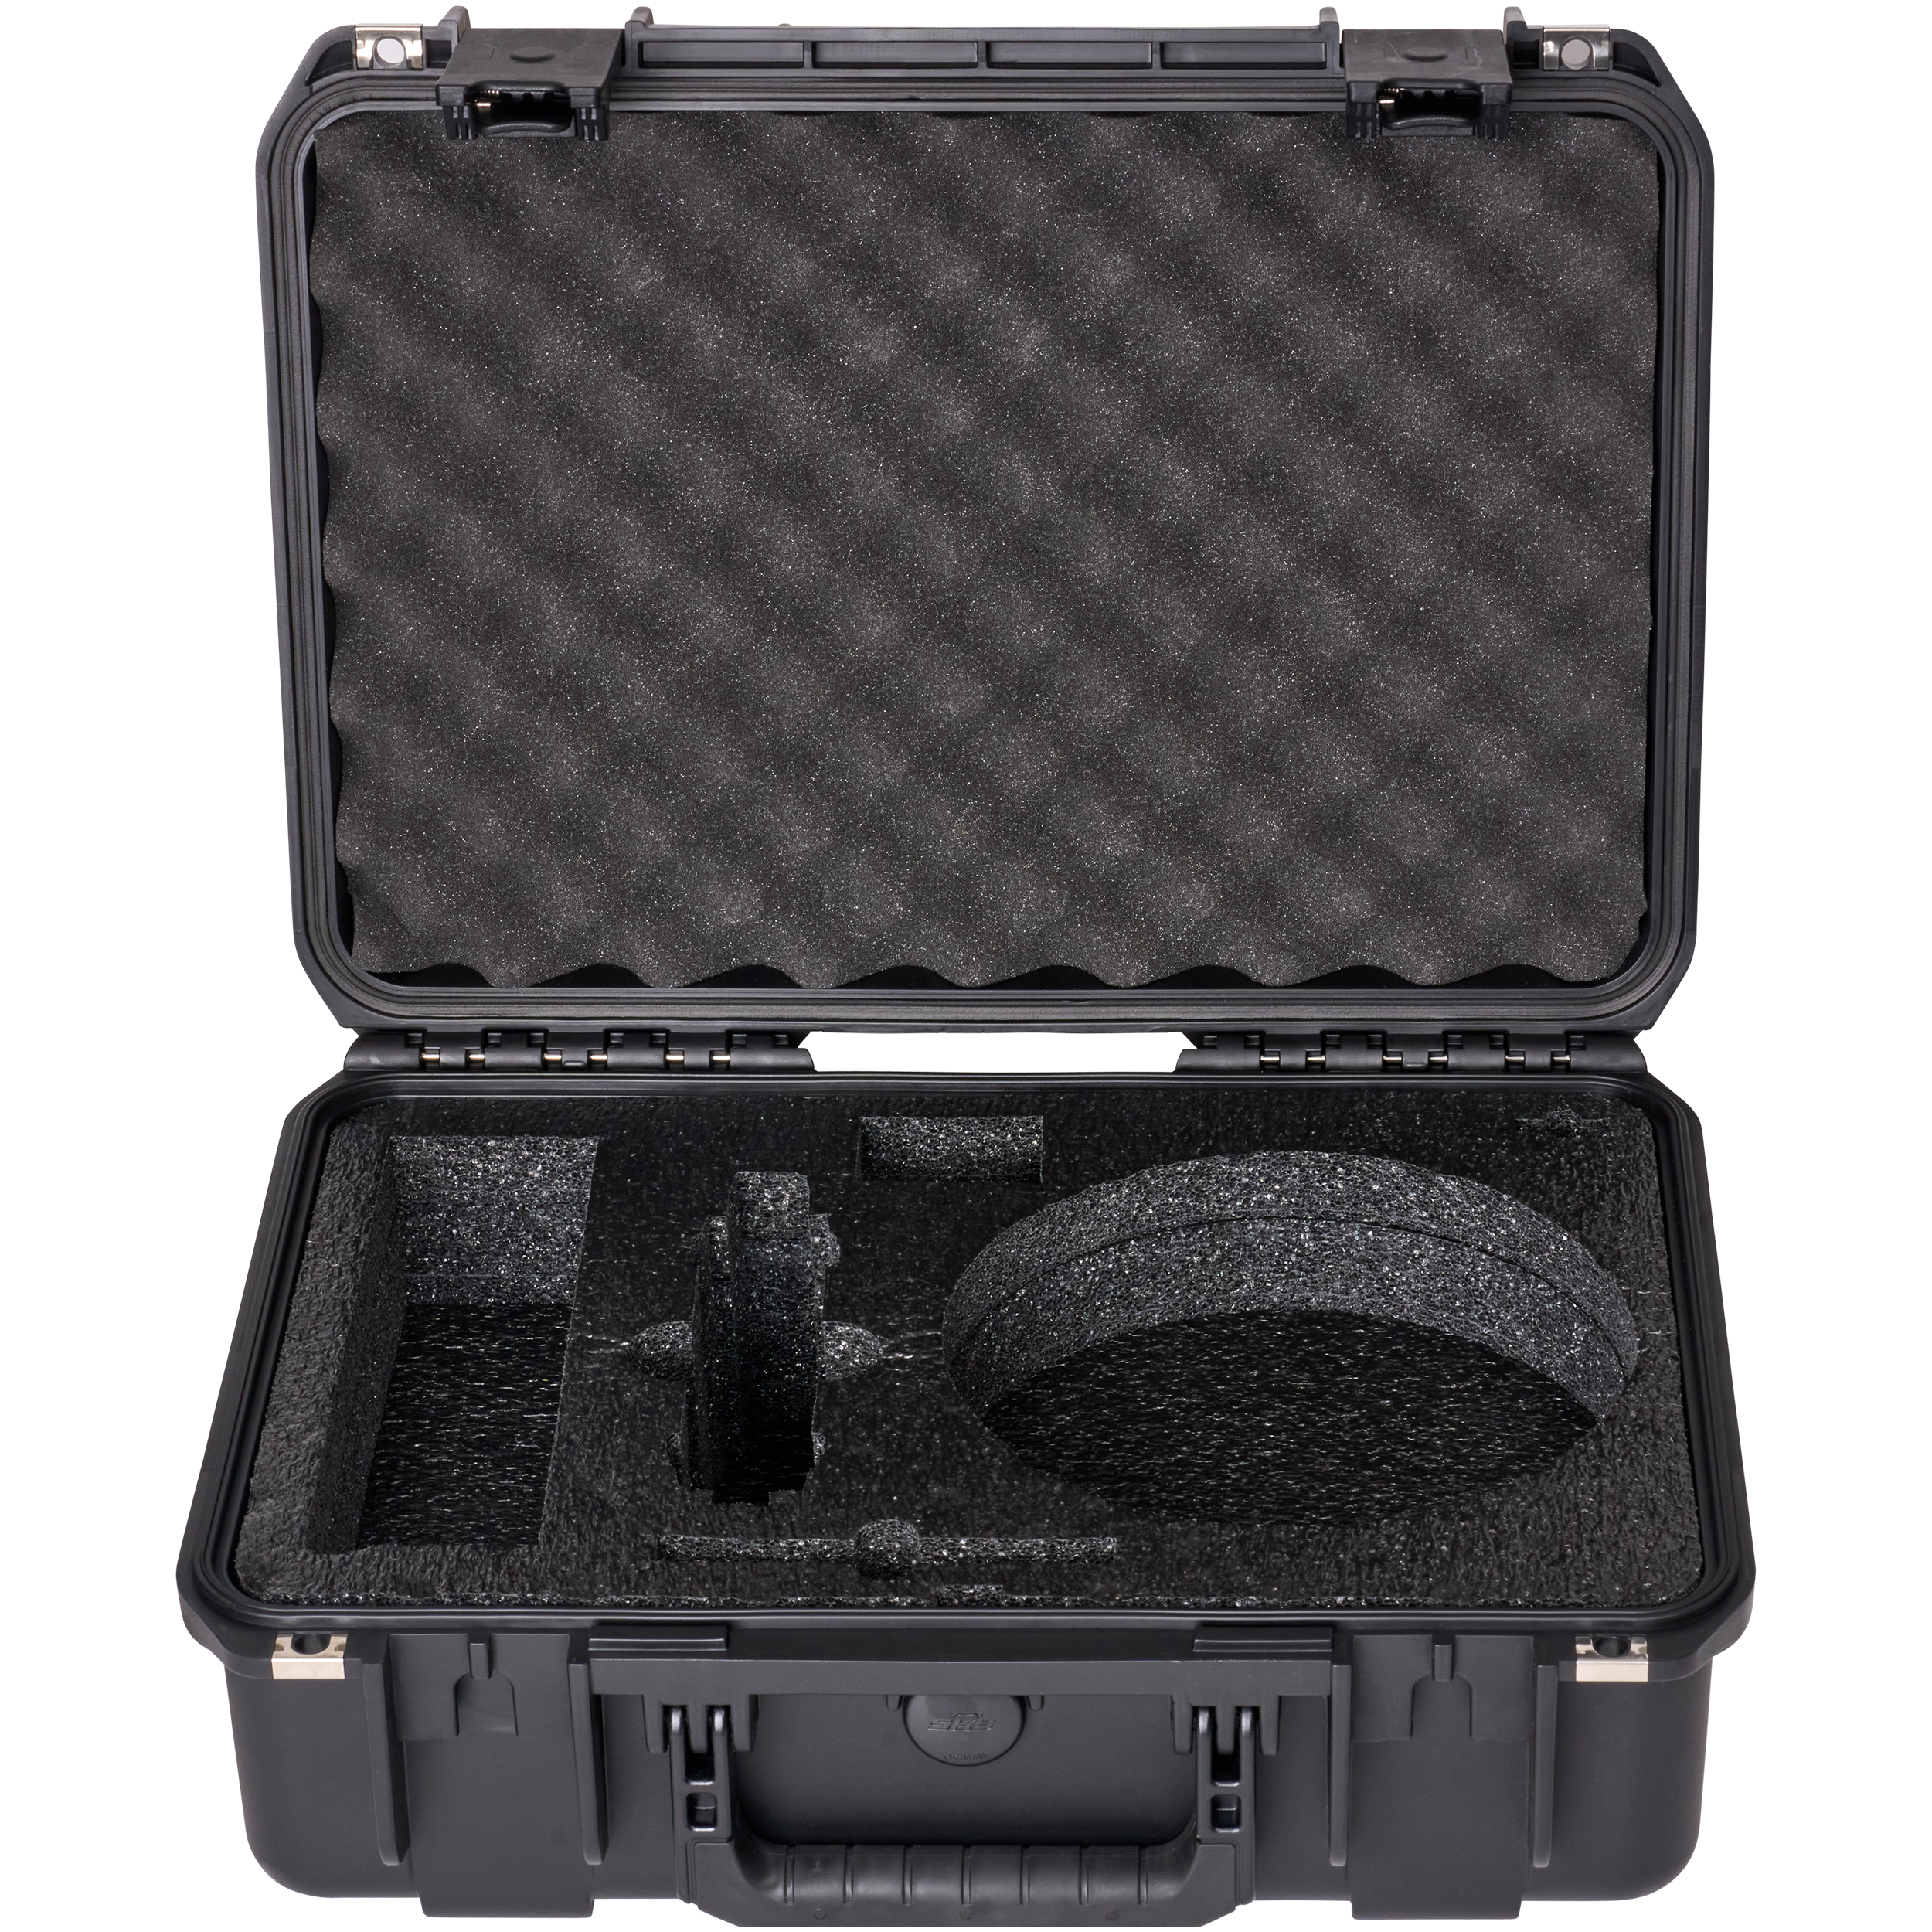 BYFP ipCase for Shure Diversity ShowLink Access Point